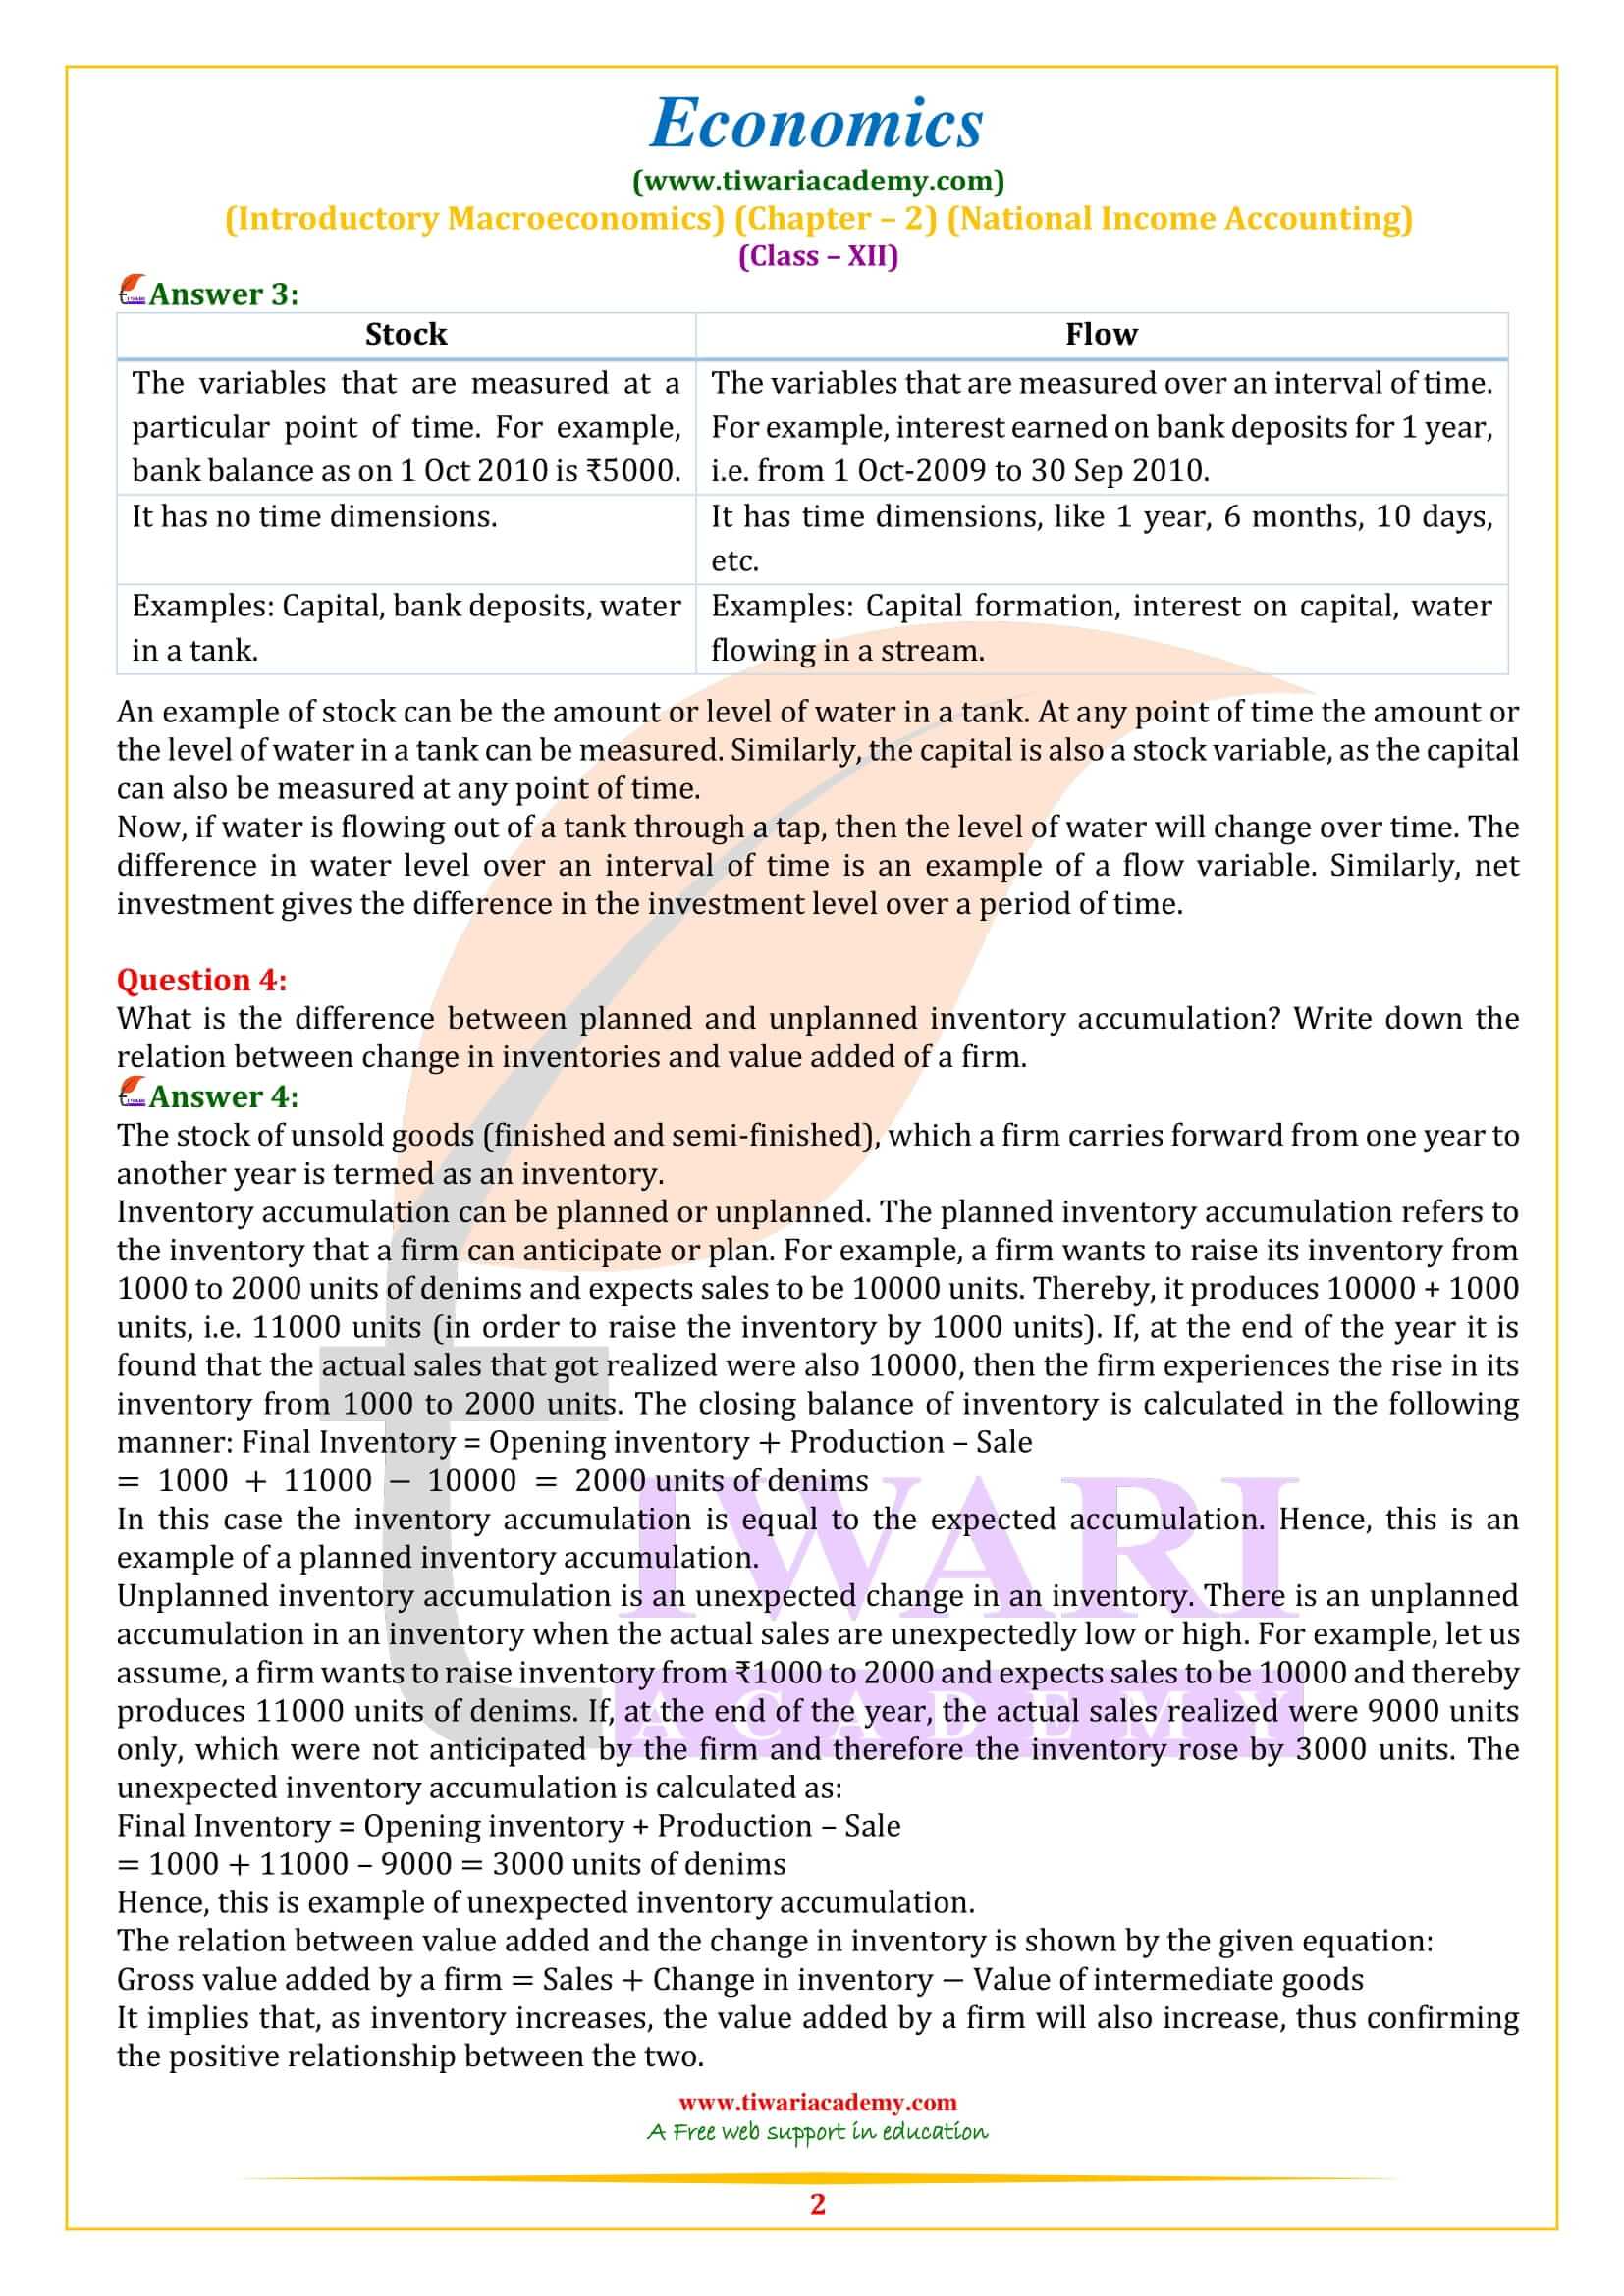 NCERT Solutions for Class 12 Economics Chapter 2 National Income Accounting